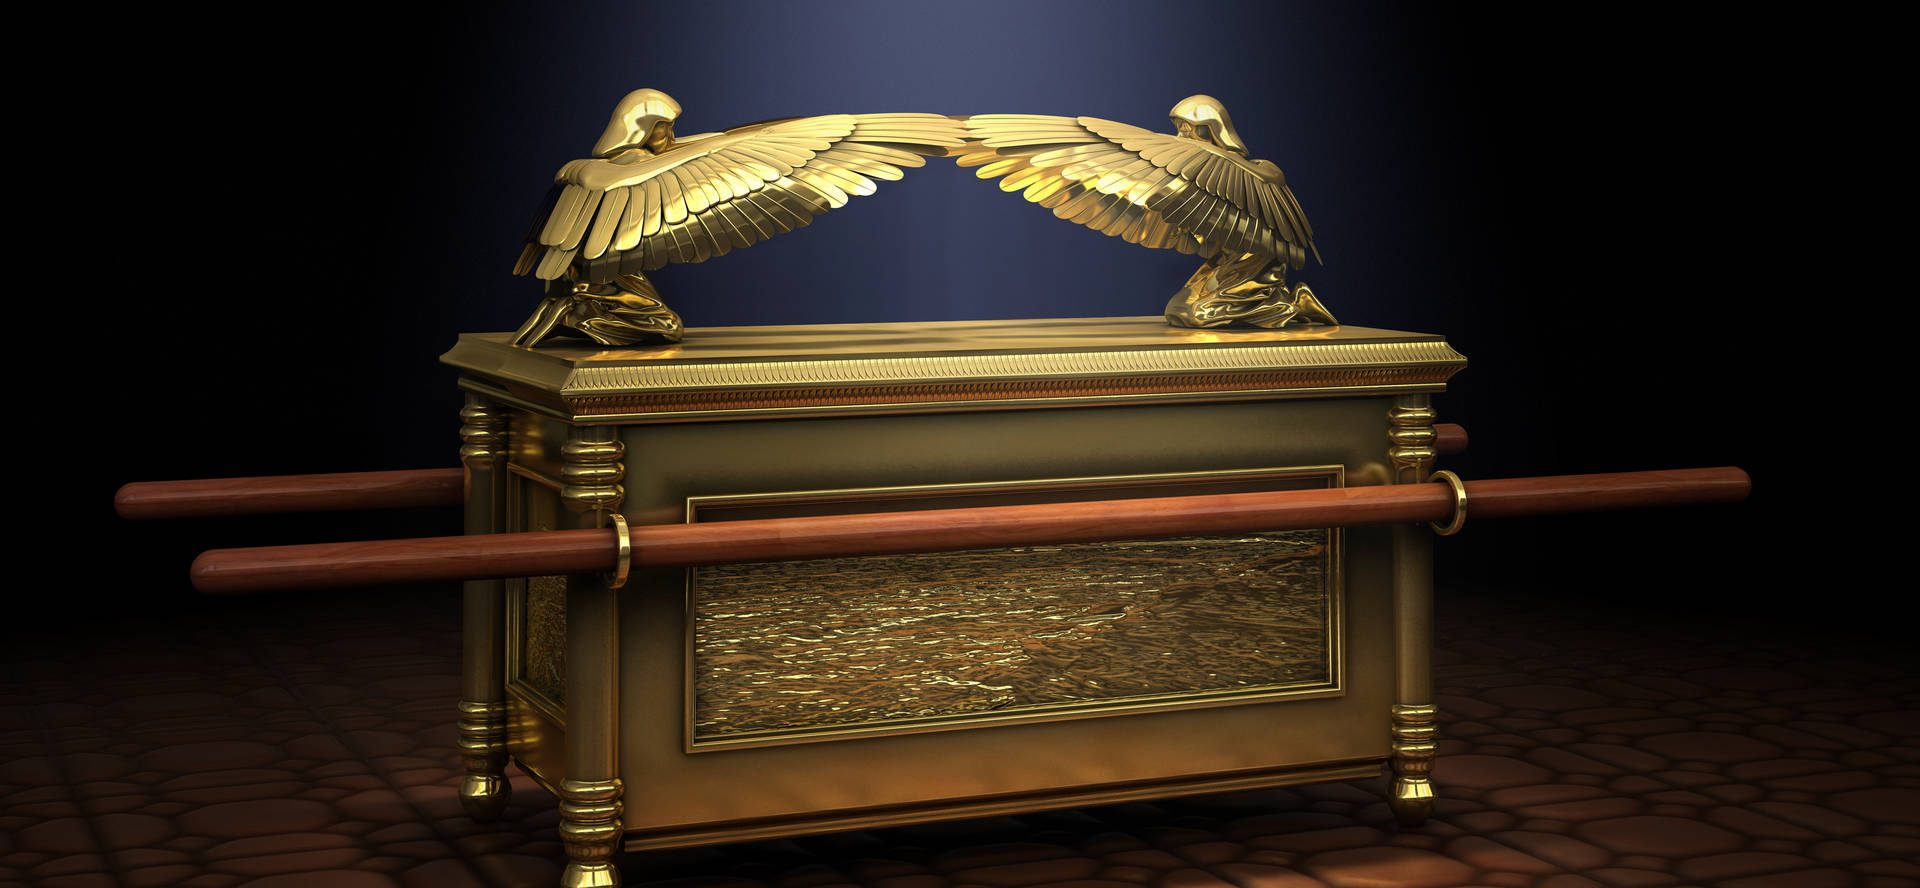 Artist’s impression of Ark of the Covenant. Copyrighted. Licensed (dp: 13481804)